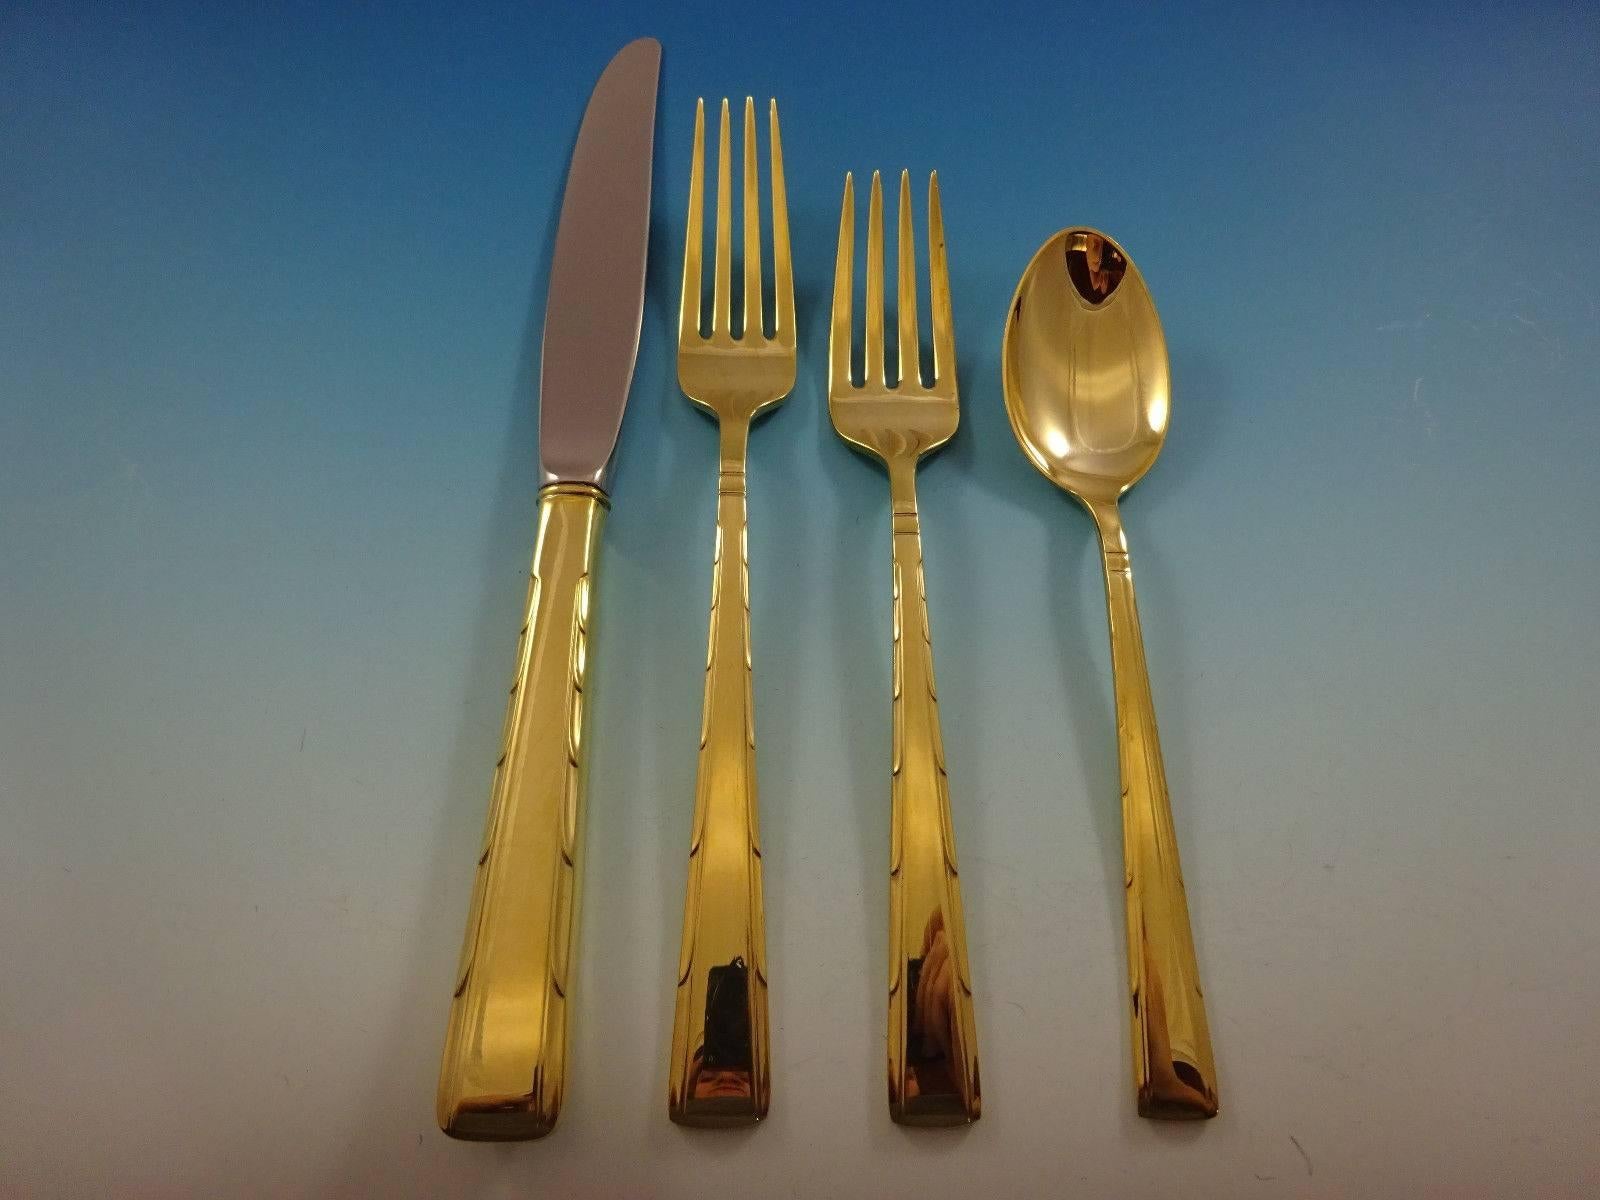 Add some luxe to your life with this fabulous horizon gold by Easterling Sterling Silver flatware set - 32 pieces. Gold flatware is on trend and makes a bold statement on your table, especially when paired with gold rimmed china and gold accents.